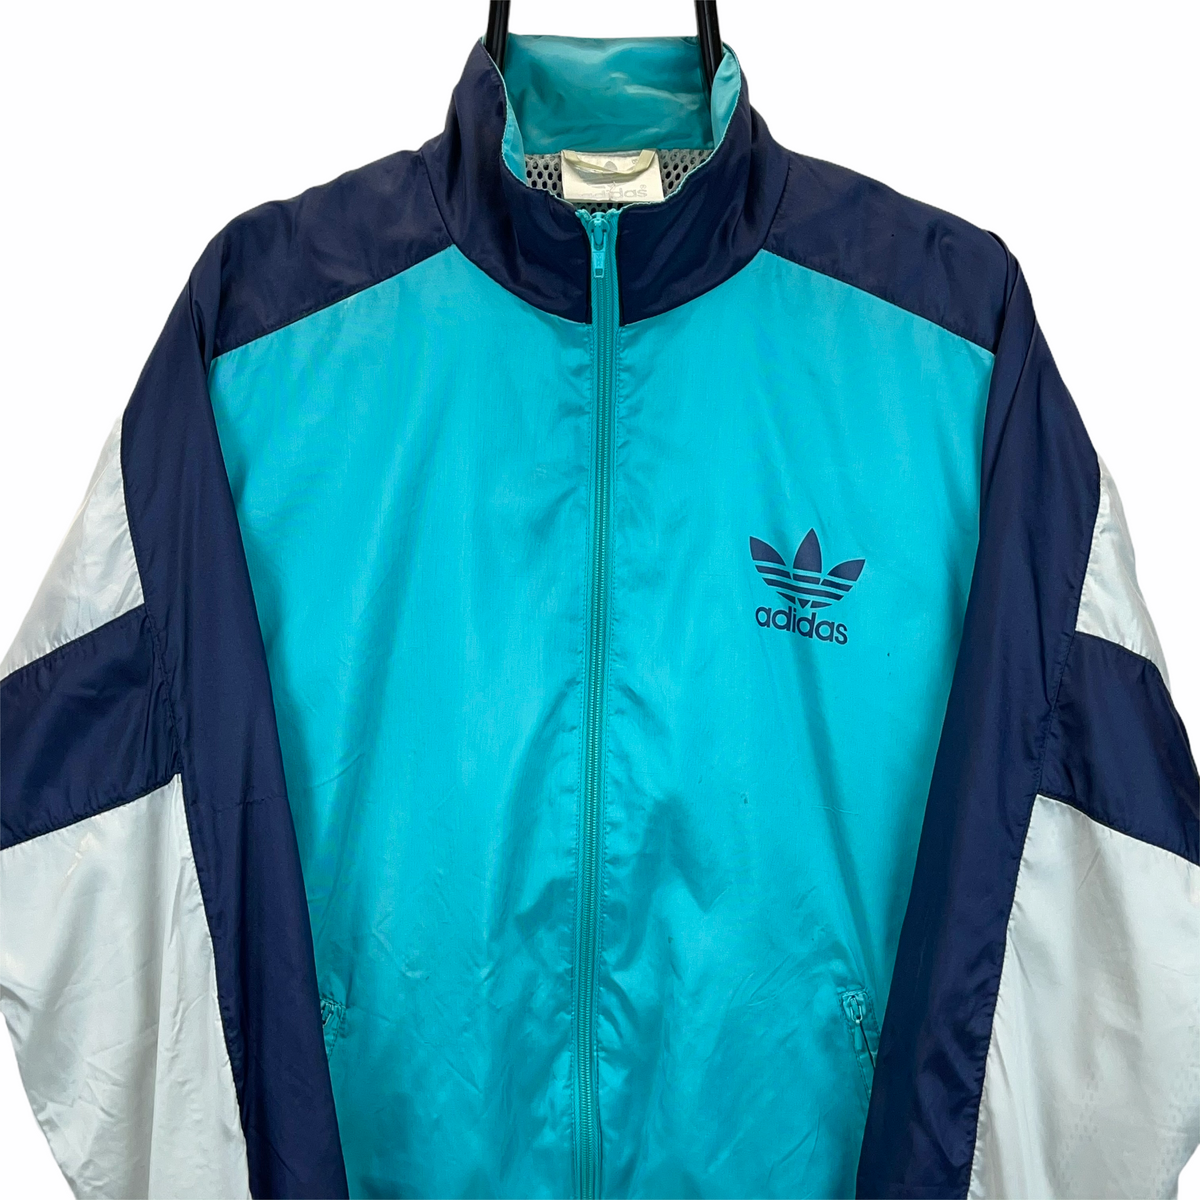 Vintage 90s Adidas Track Jacket in Turquoise, Navy & Silver - Men's Me ...